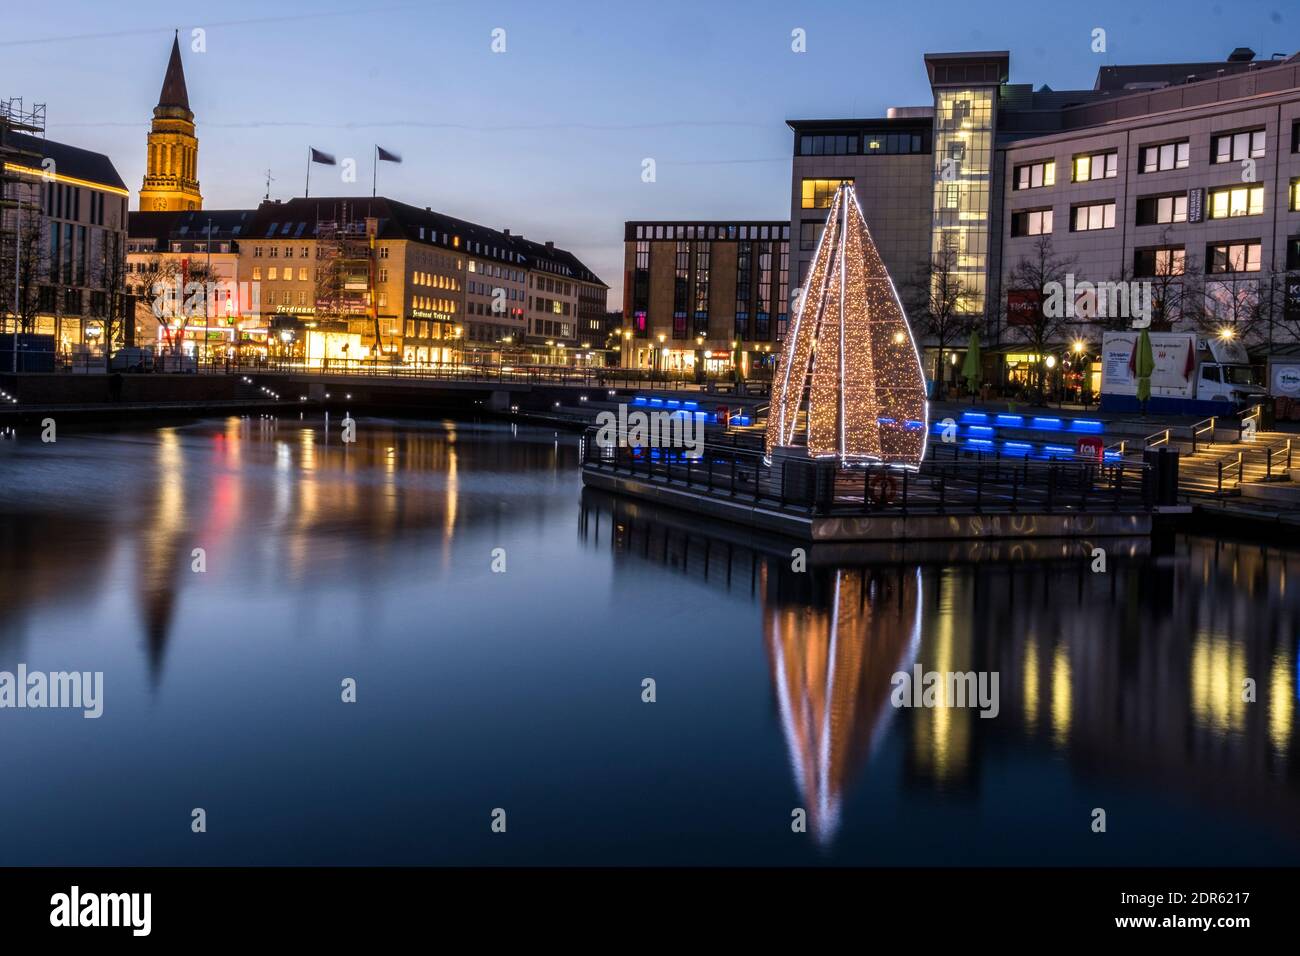 Blue hour in the city of Kiel in Nothern Germany Stock Photo